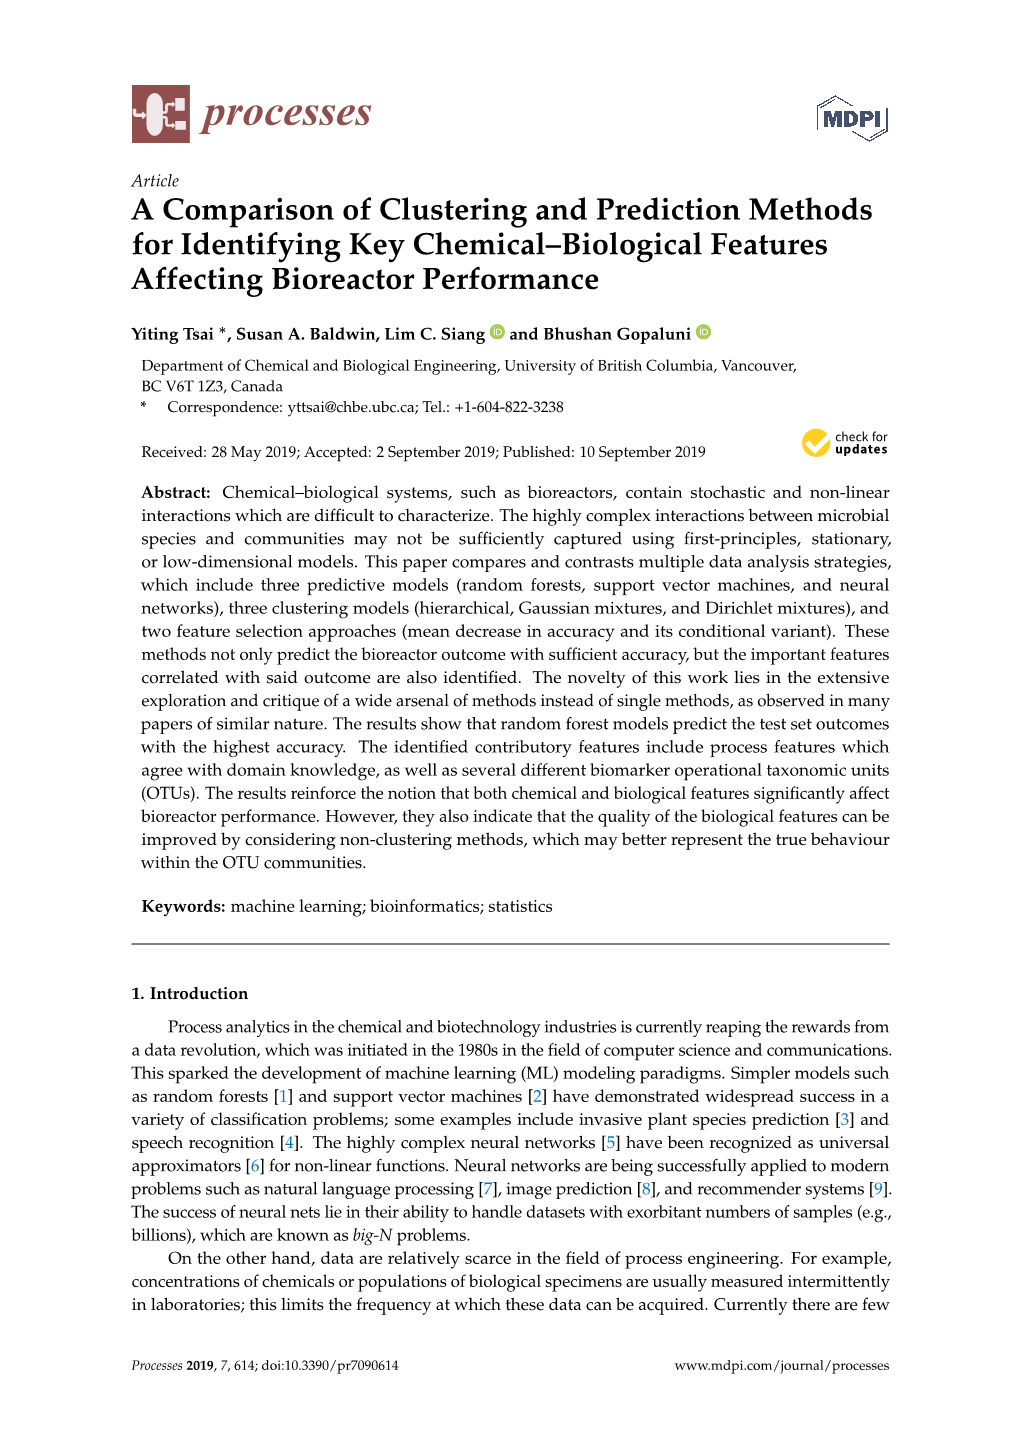 A Comparison of Clustering and Prediction Methods for Identifying Key Chemical–Biological Features Affecting Bioreactor Performance